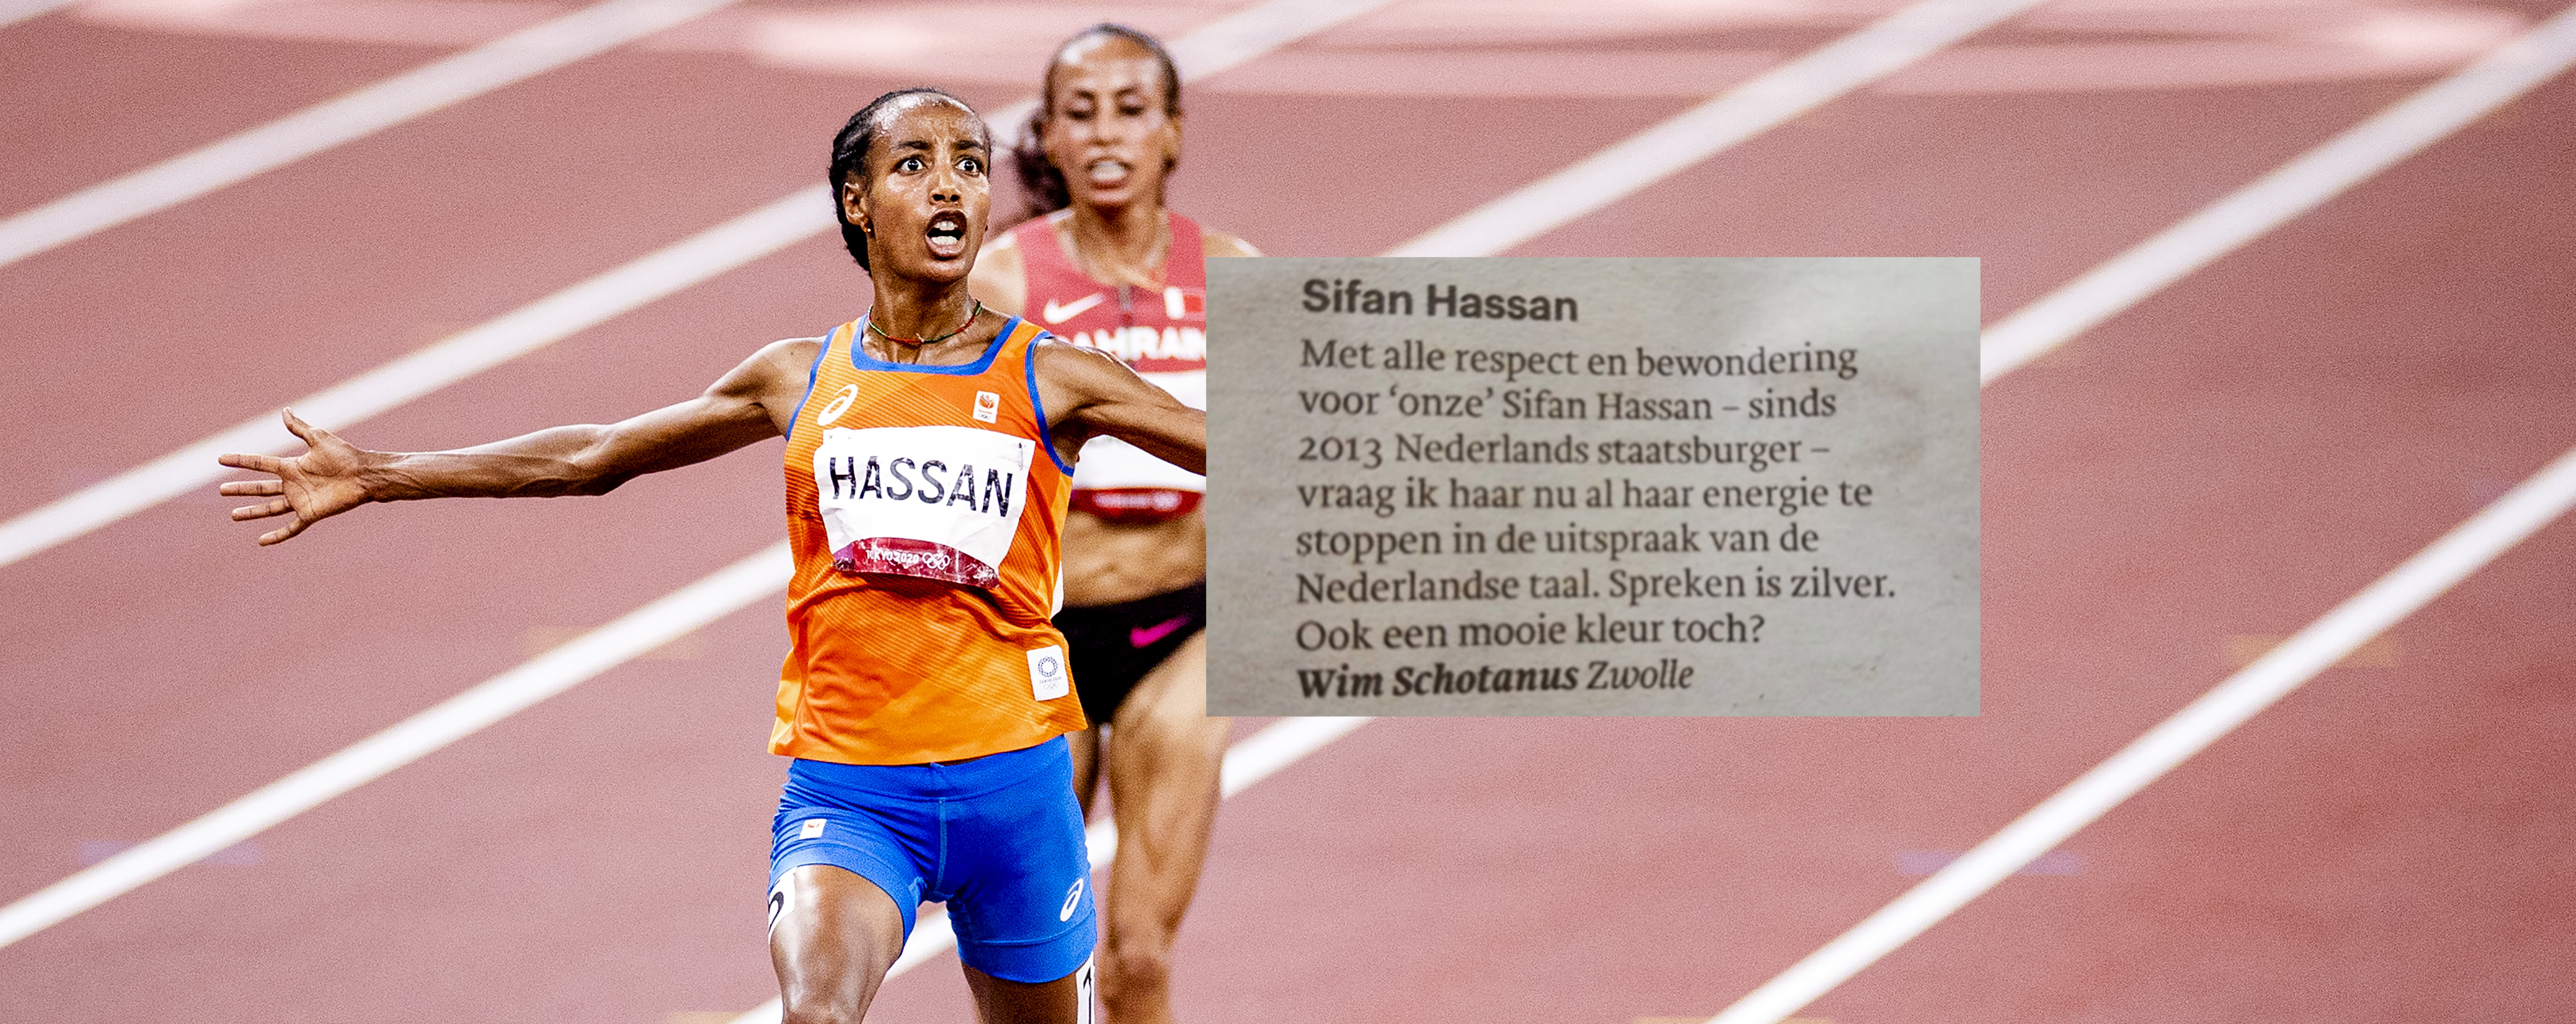 Sifan Hassan, Trouw